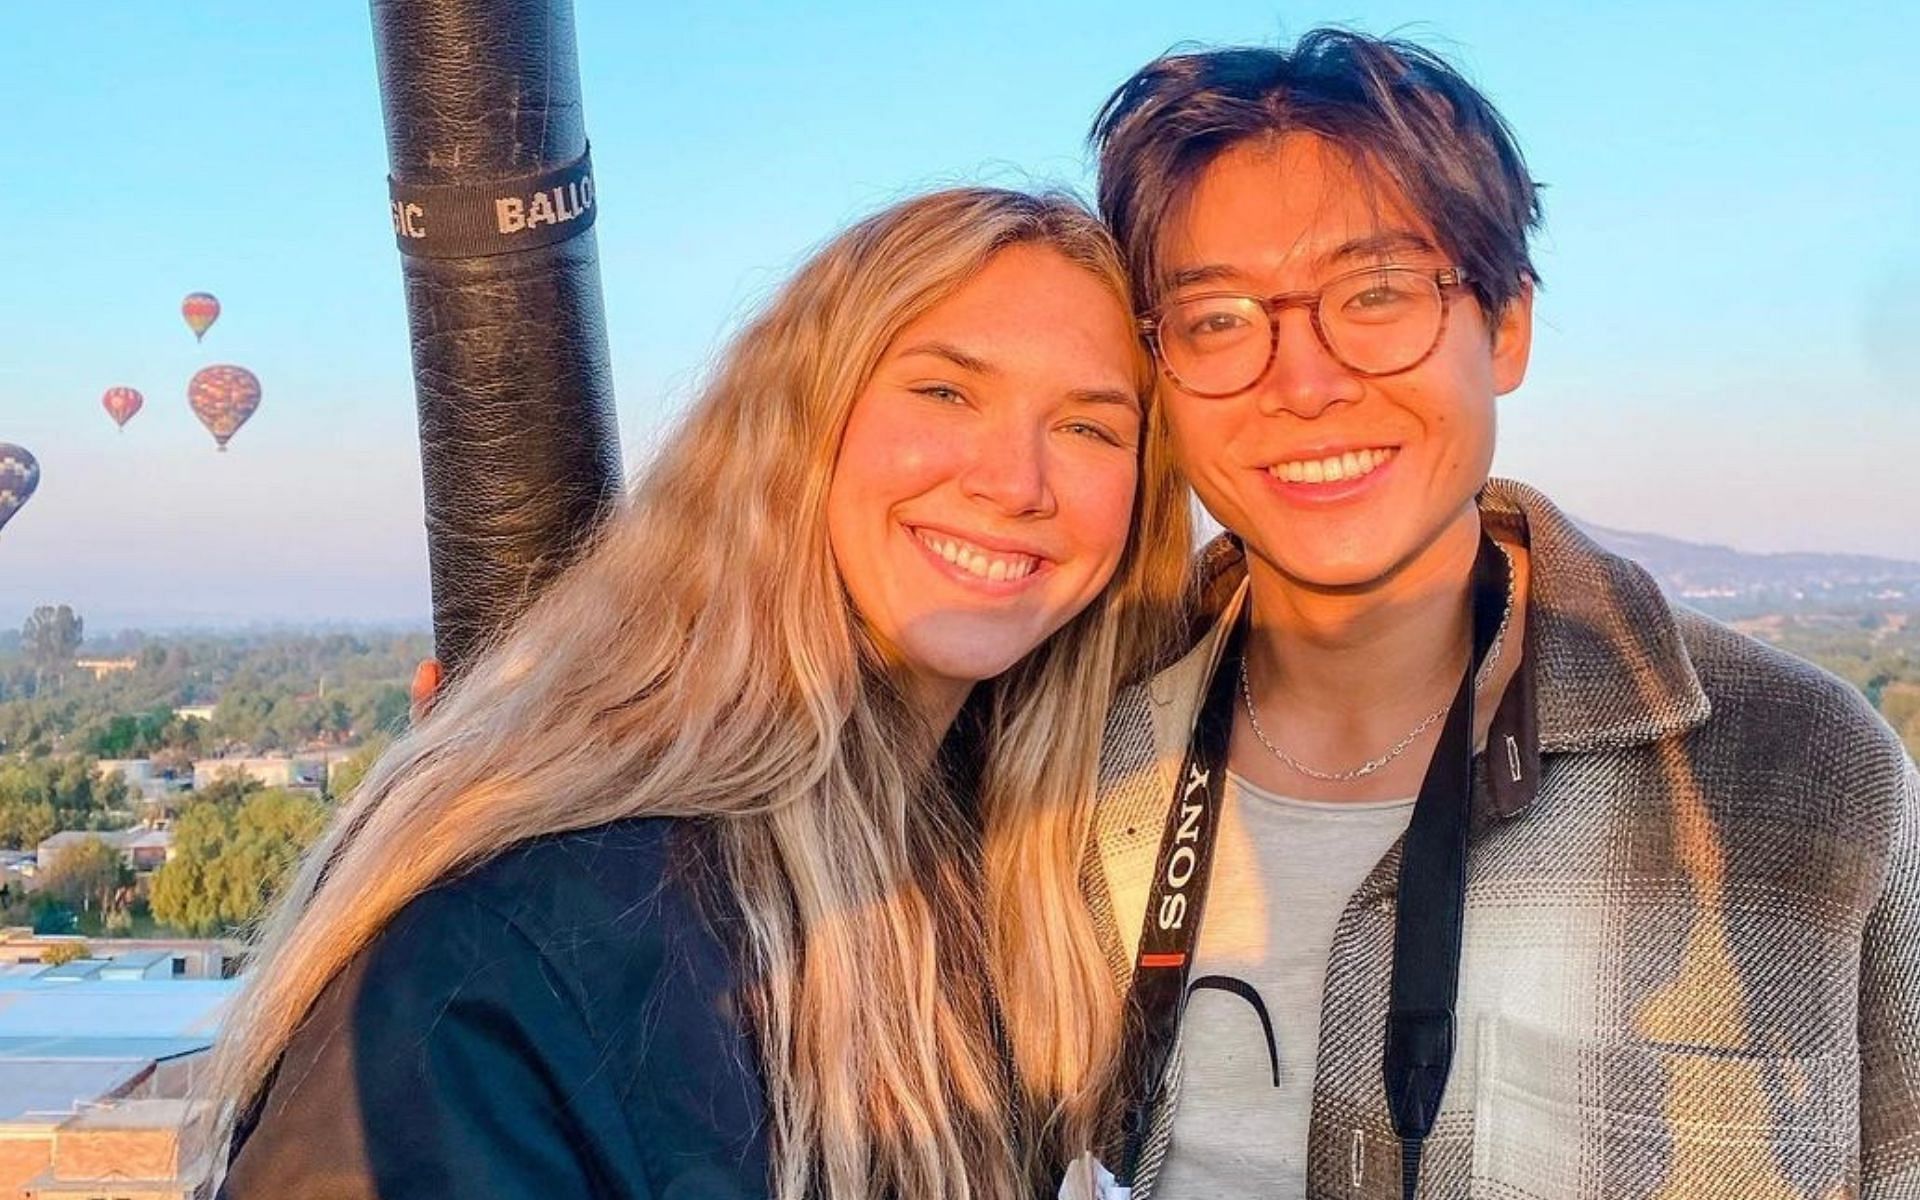 Big Brother 23 contestants Derek Xiao and Claire Rehfuss are in a relationship (Image via clairerehfuss/Instagram)